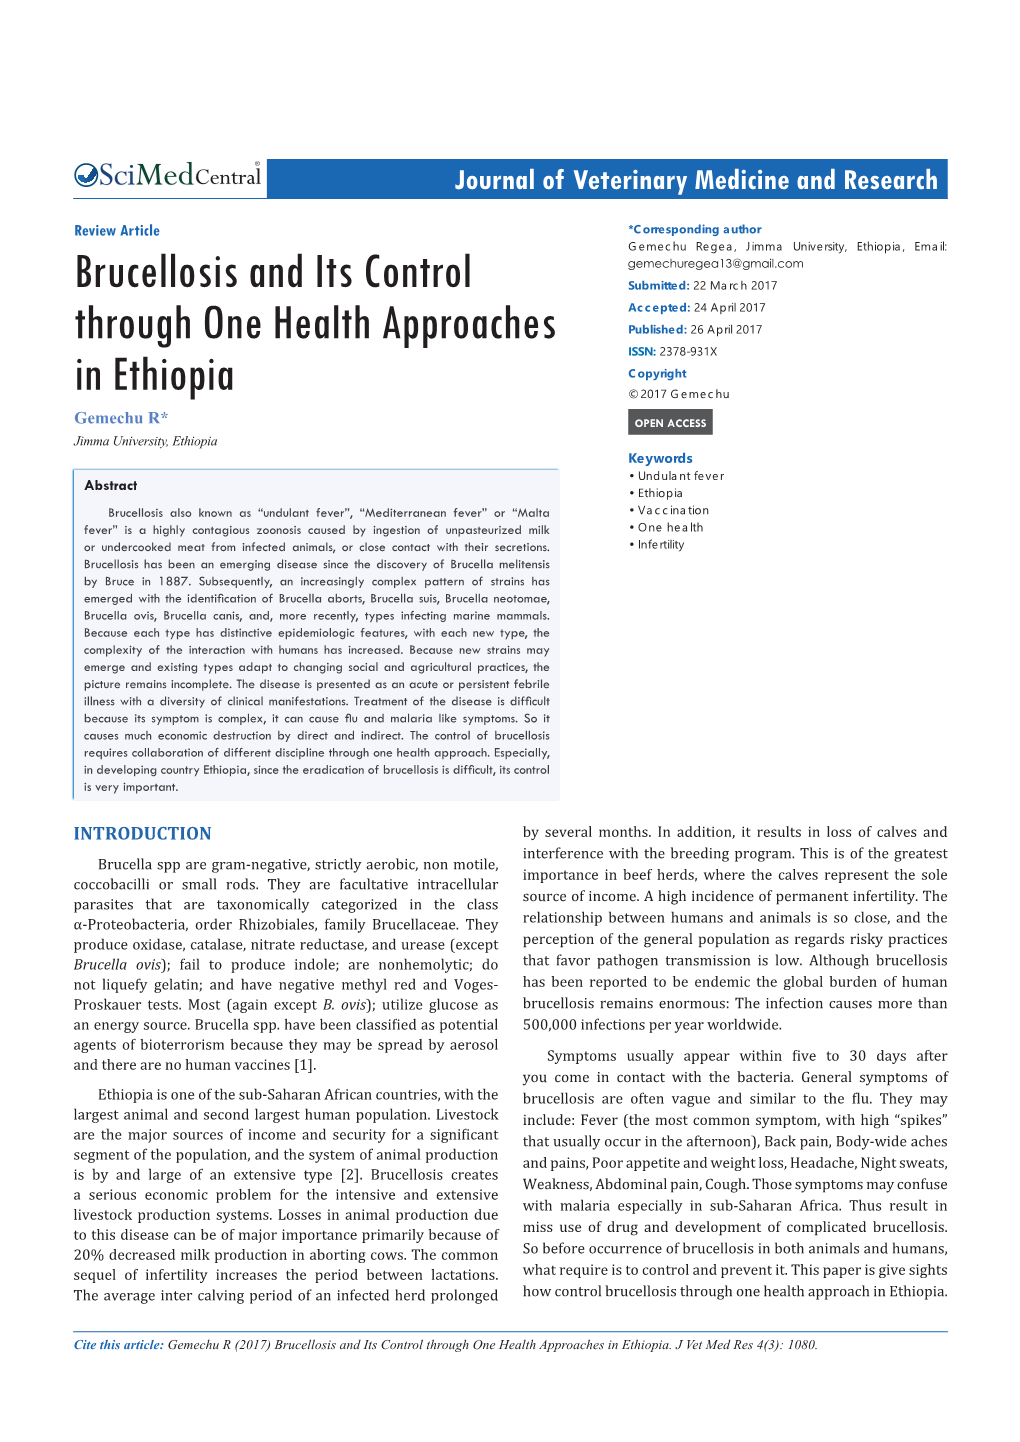 Brucellosis and Its Control Through One Health Approaches in Ethiopia